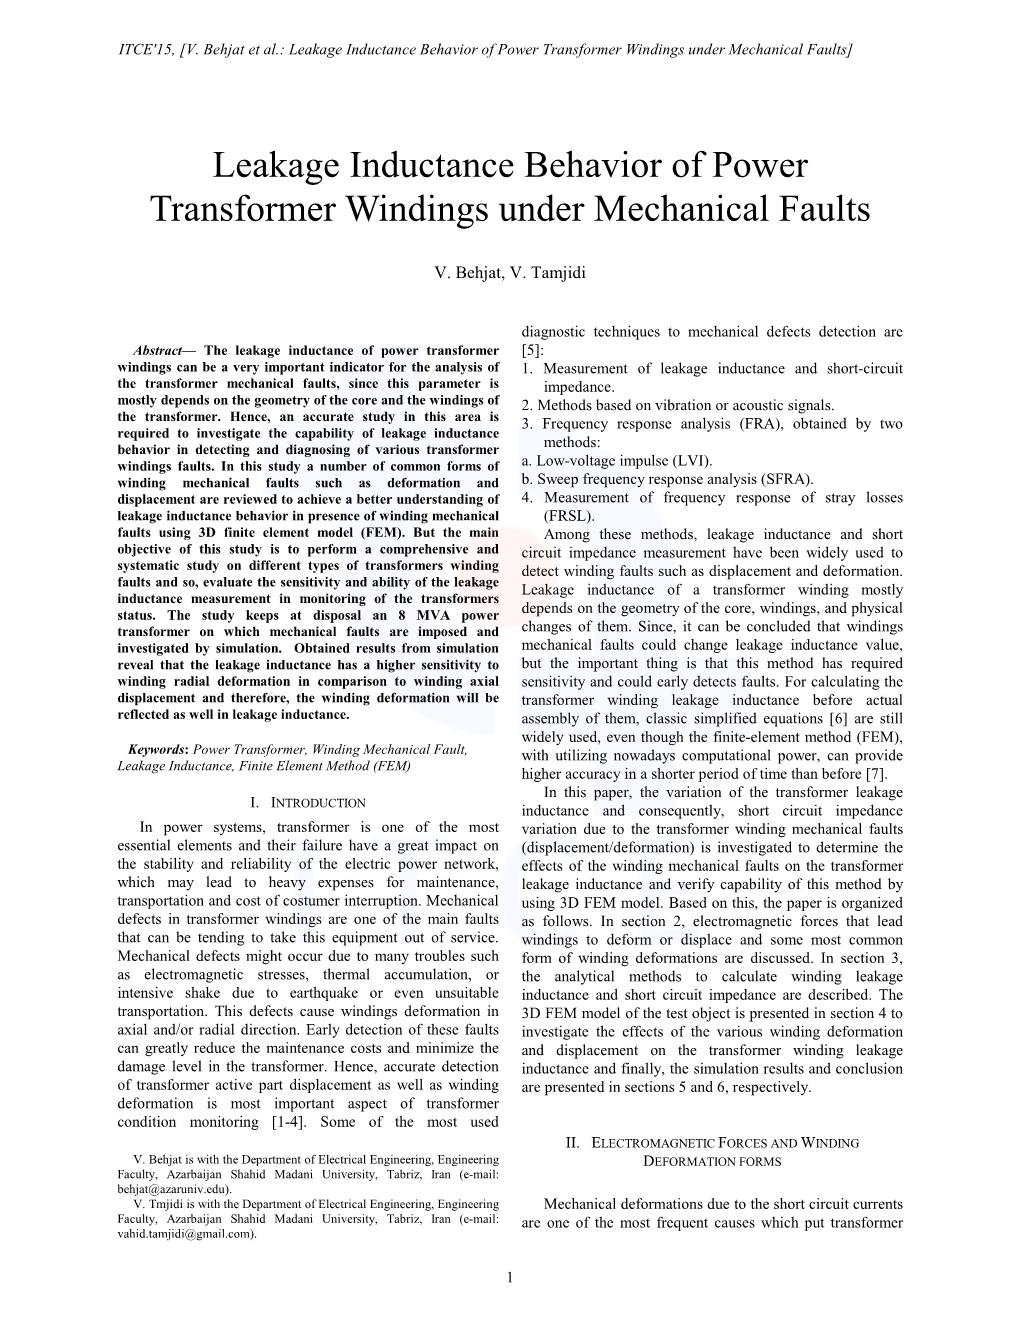 Leakage Inductance Behavior of Power Transformer Windings Under Mechanical Faults]